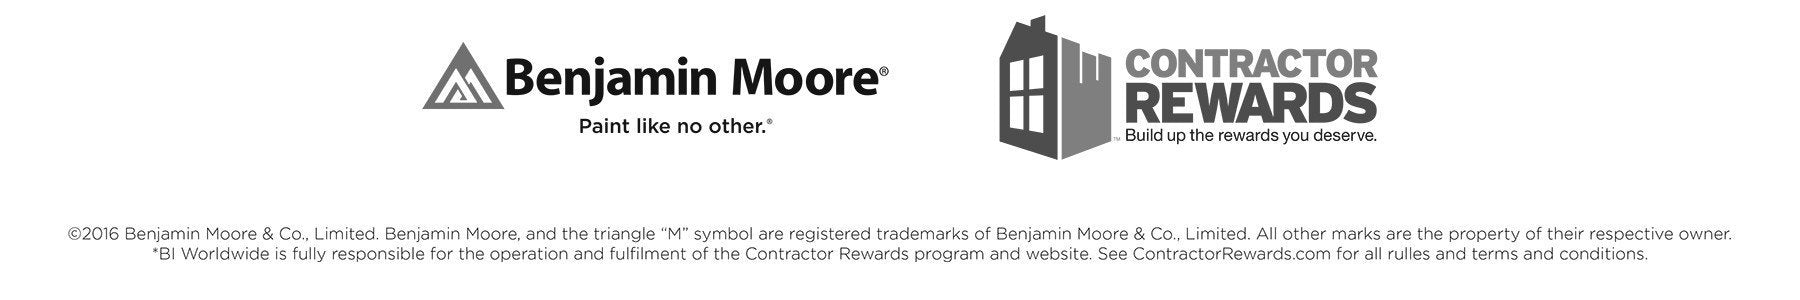 black and white graphic which contains the Benjamin Moore Paint logo and the Contractor Rewards logo side-by-side